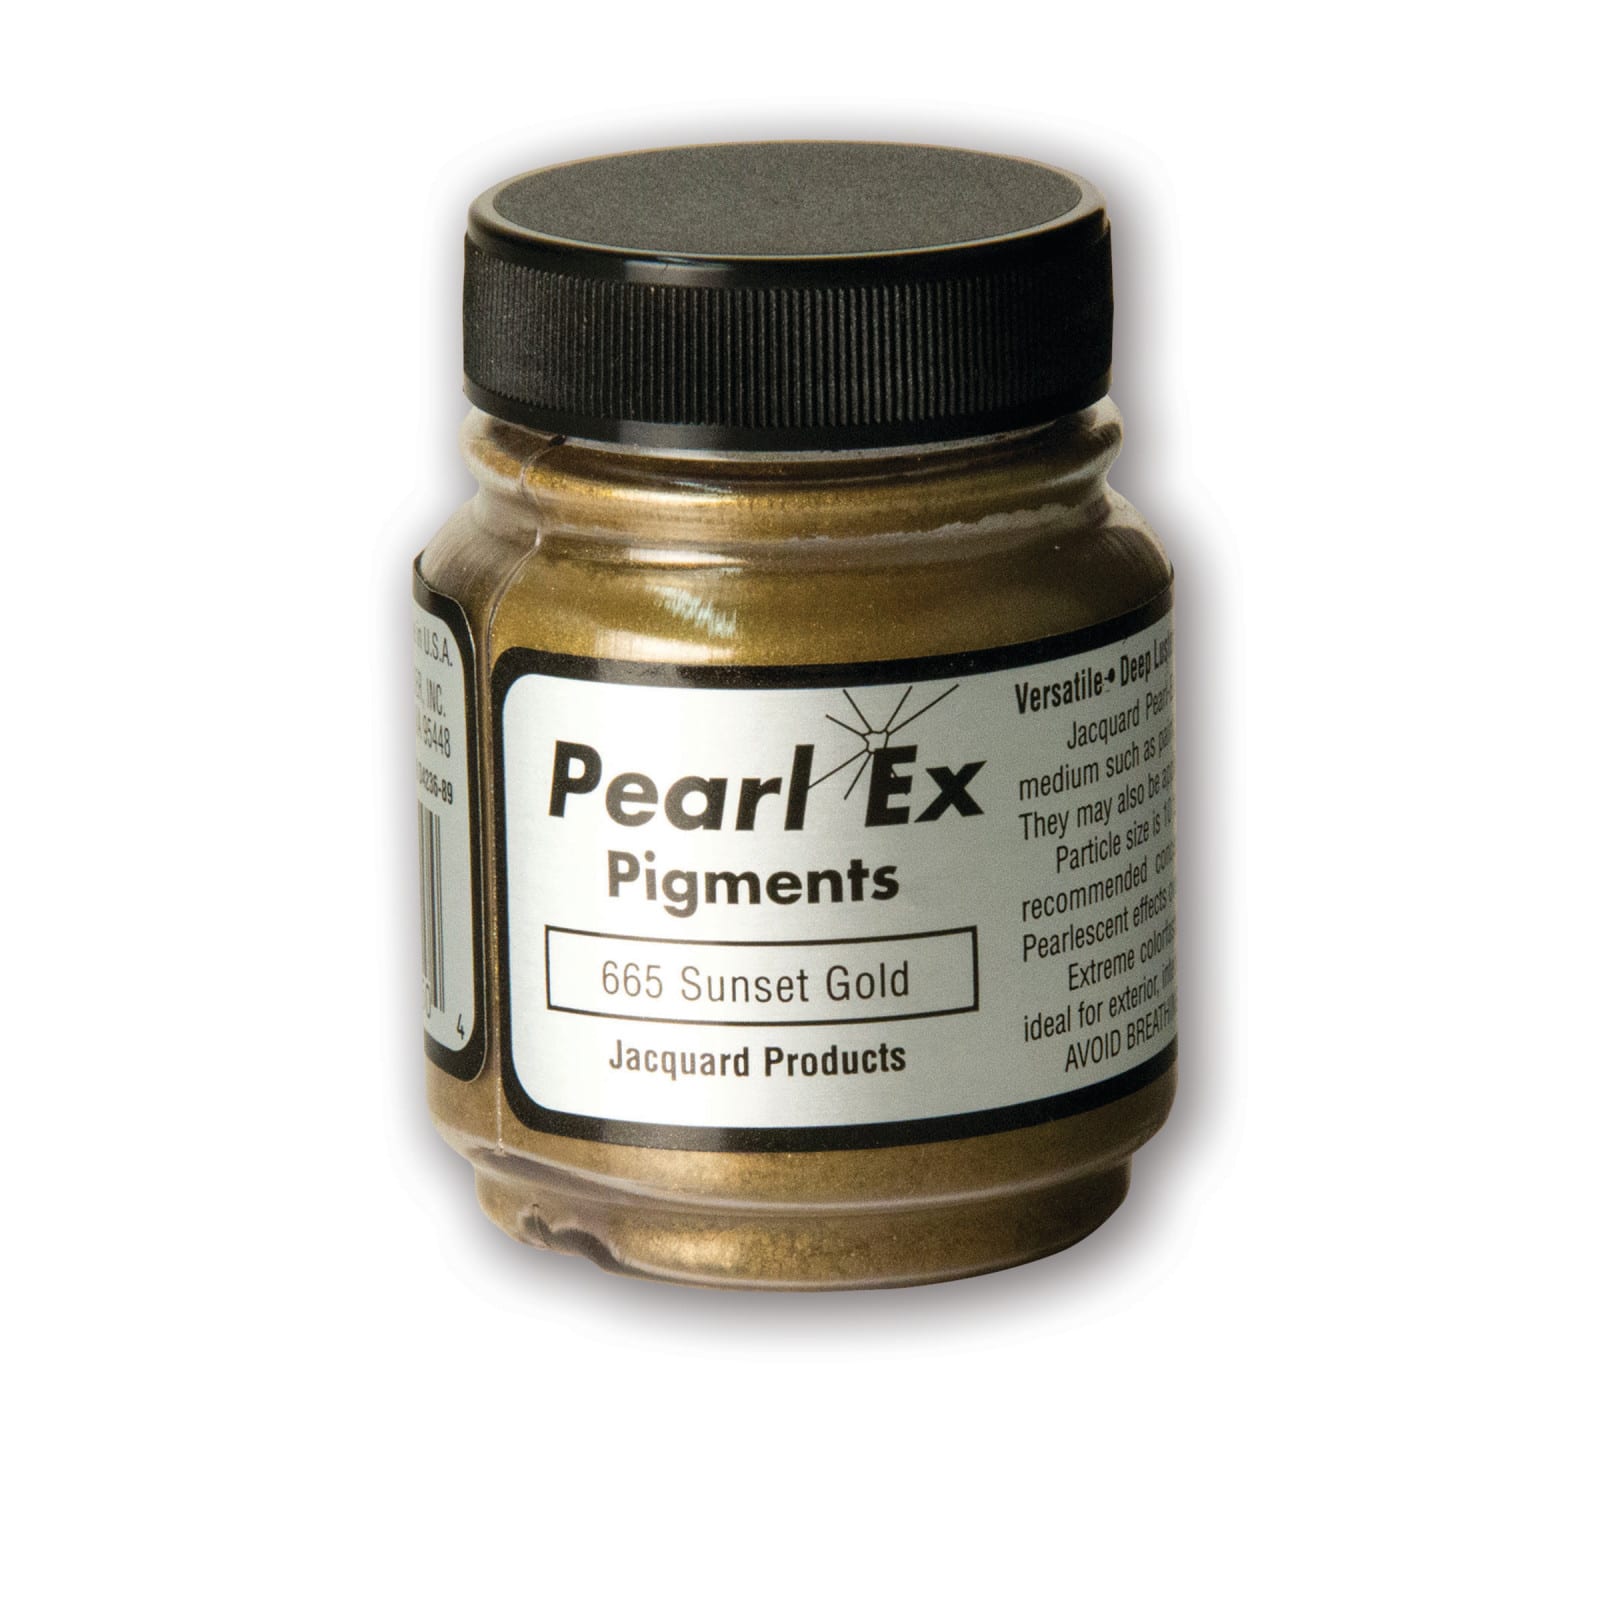 Jacquard Products — Jacquard Products - Pearl Ex Powdered Pigments